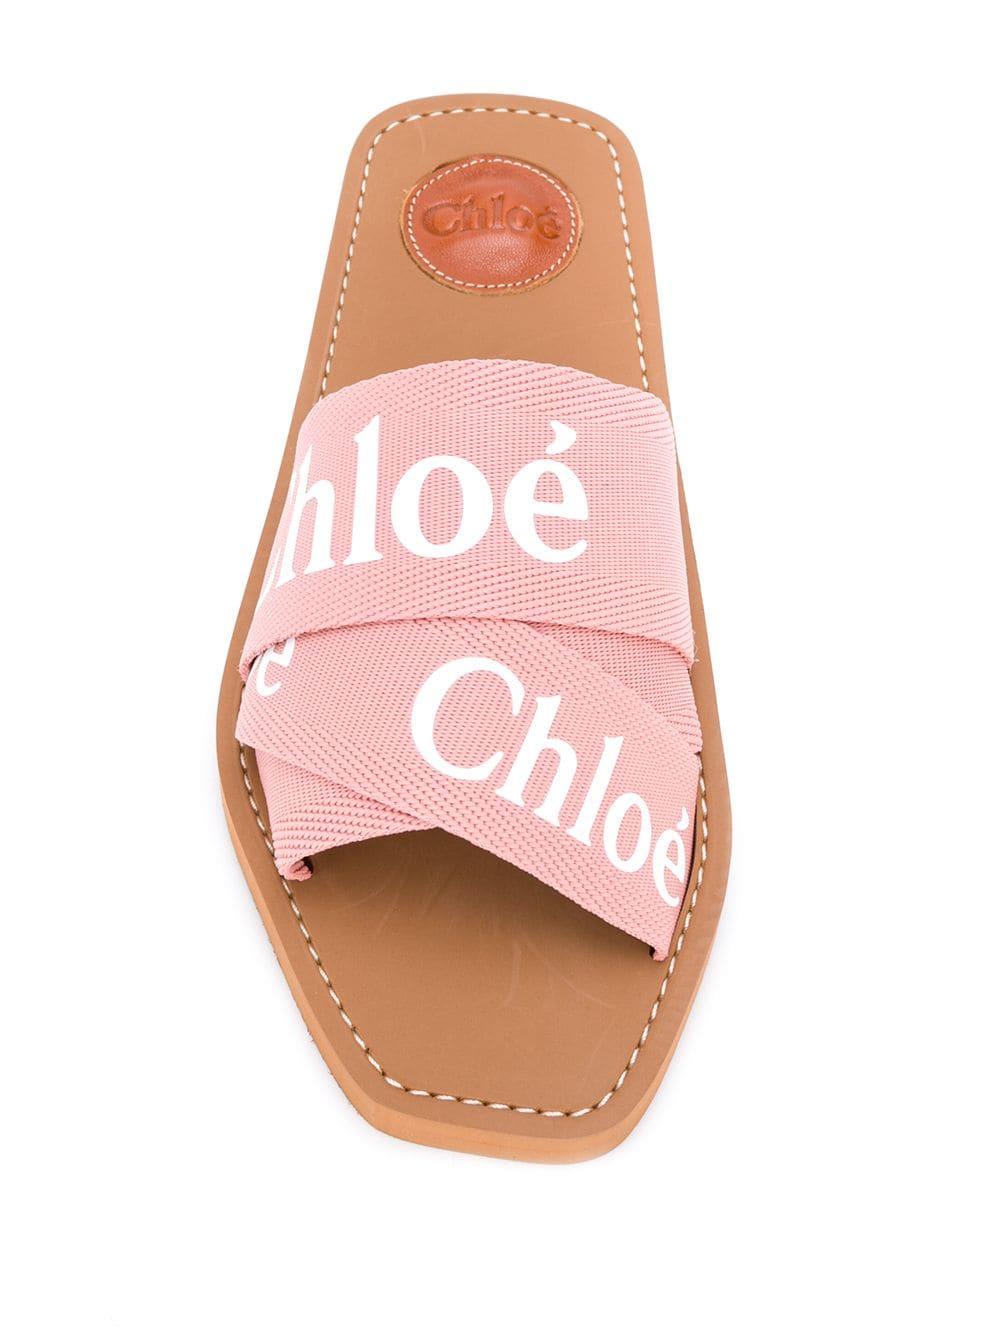 Chloé Woody Logo Canvas Slide in Light Pink (Pink) - Save 49% | Lyst